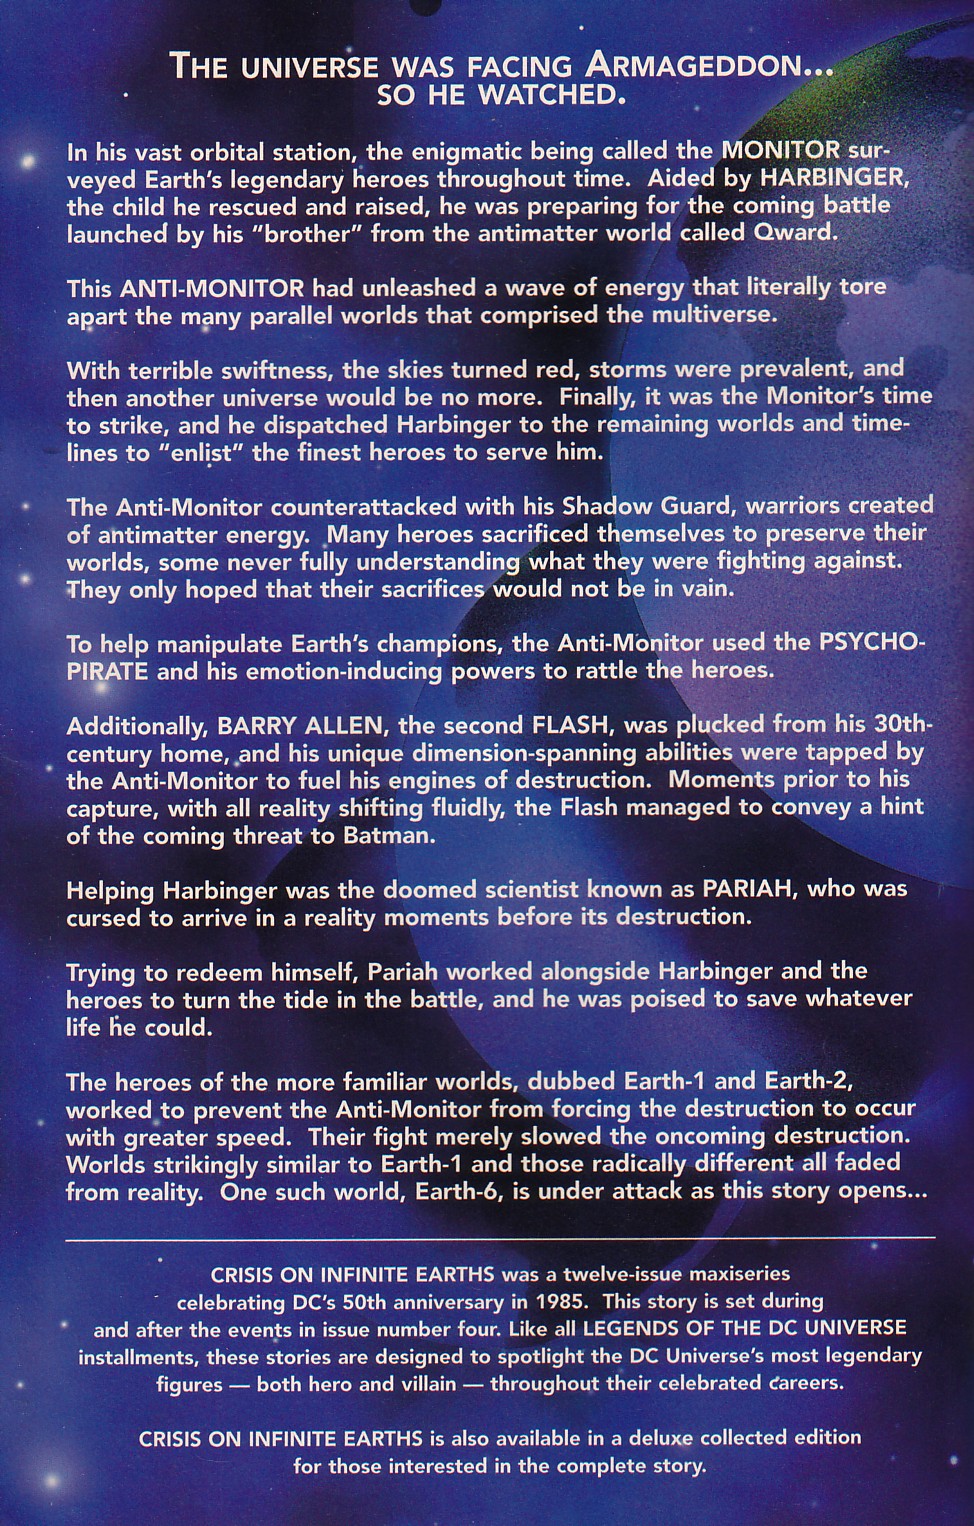 The intro page from the issue.